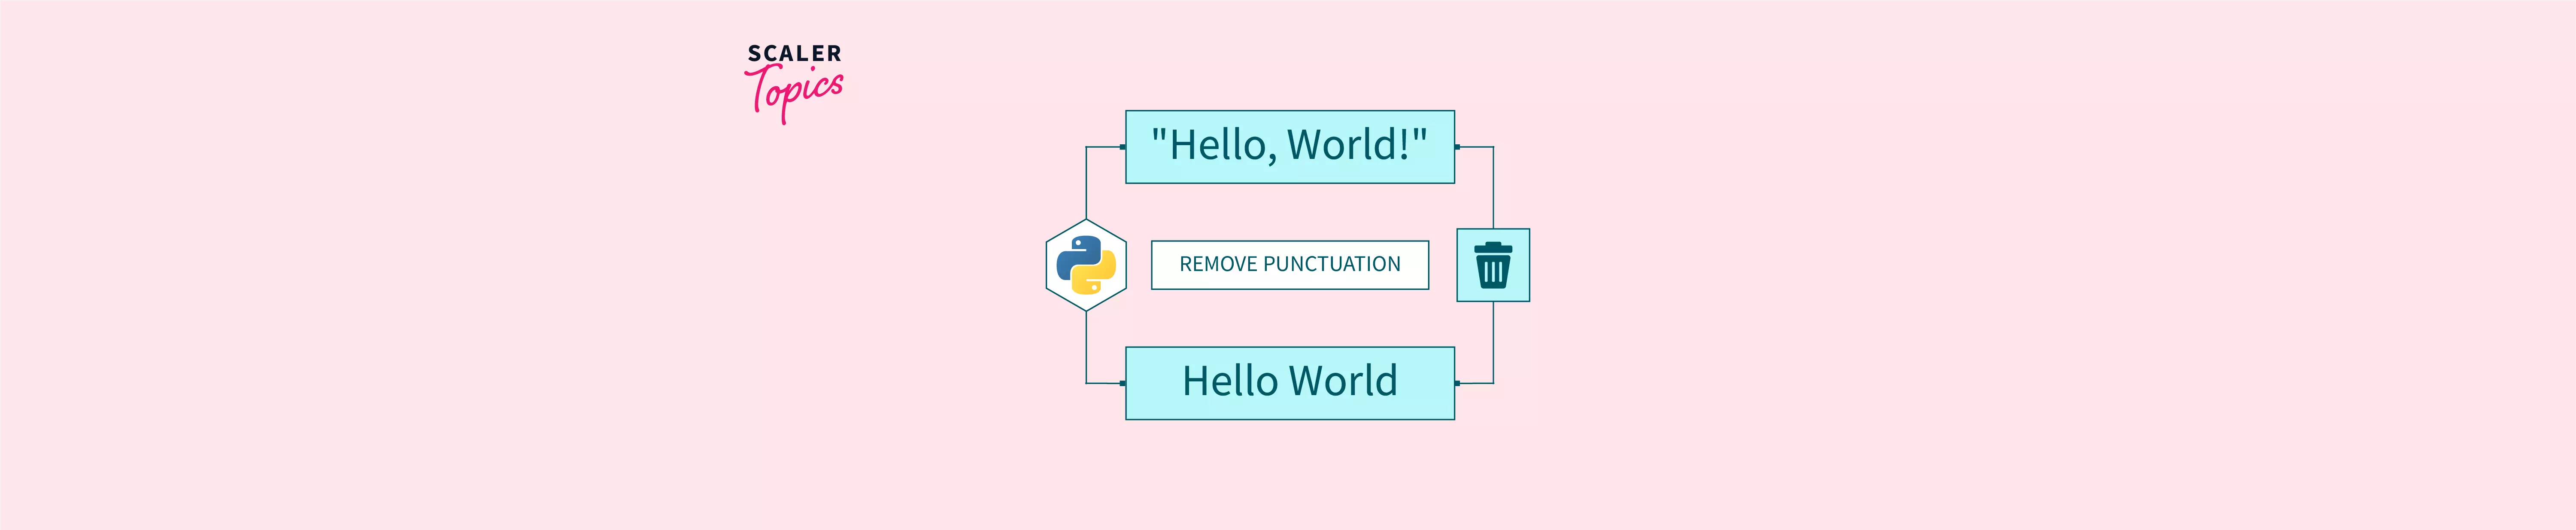 Remove Punctuation From String Python - Scaler Topics